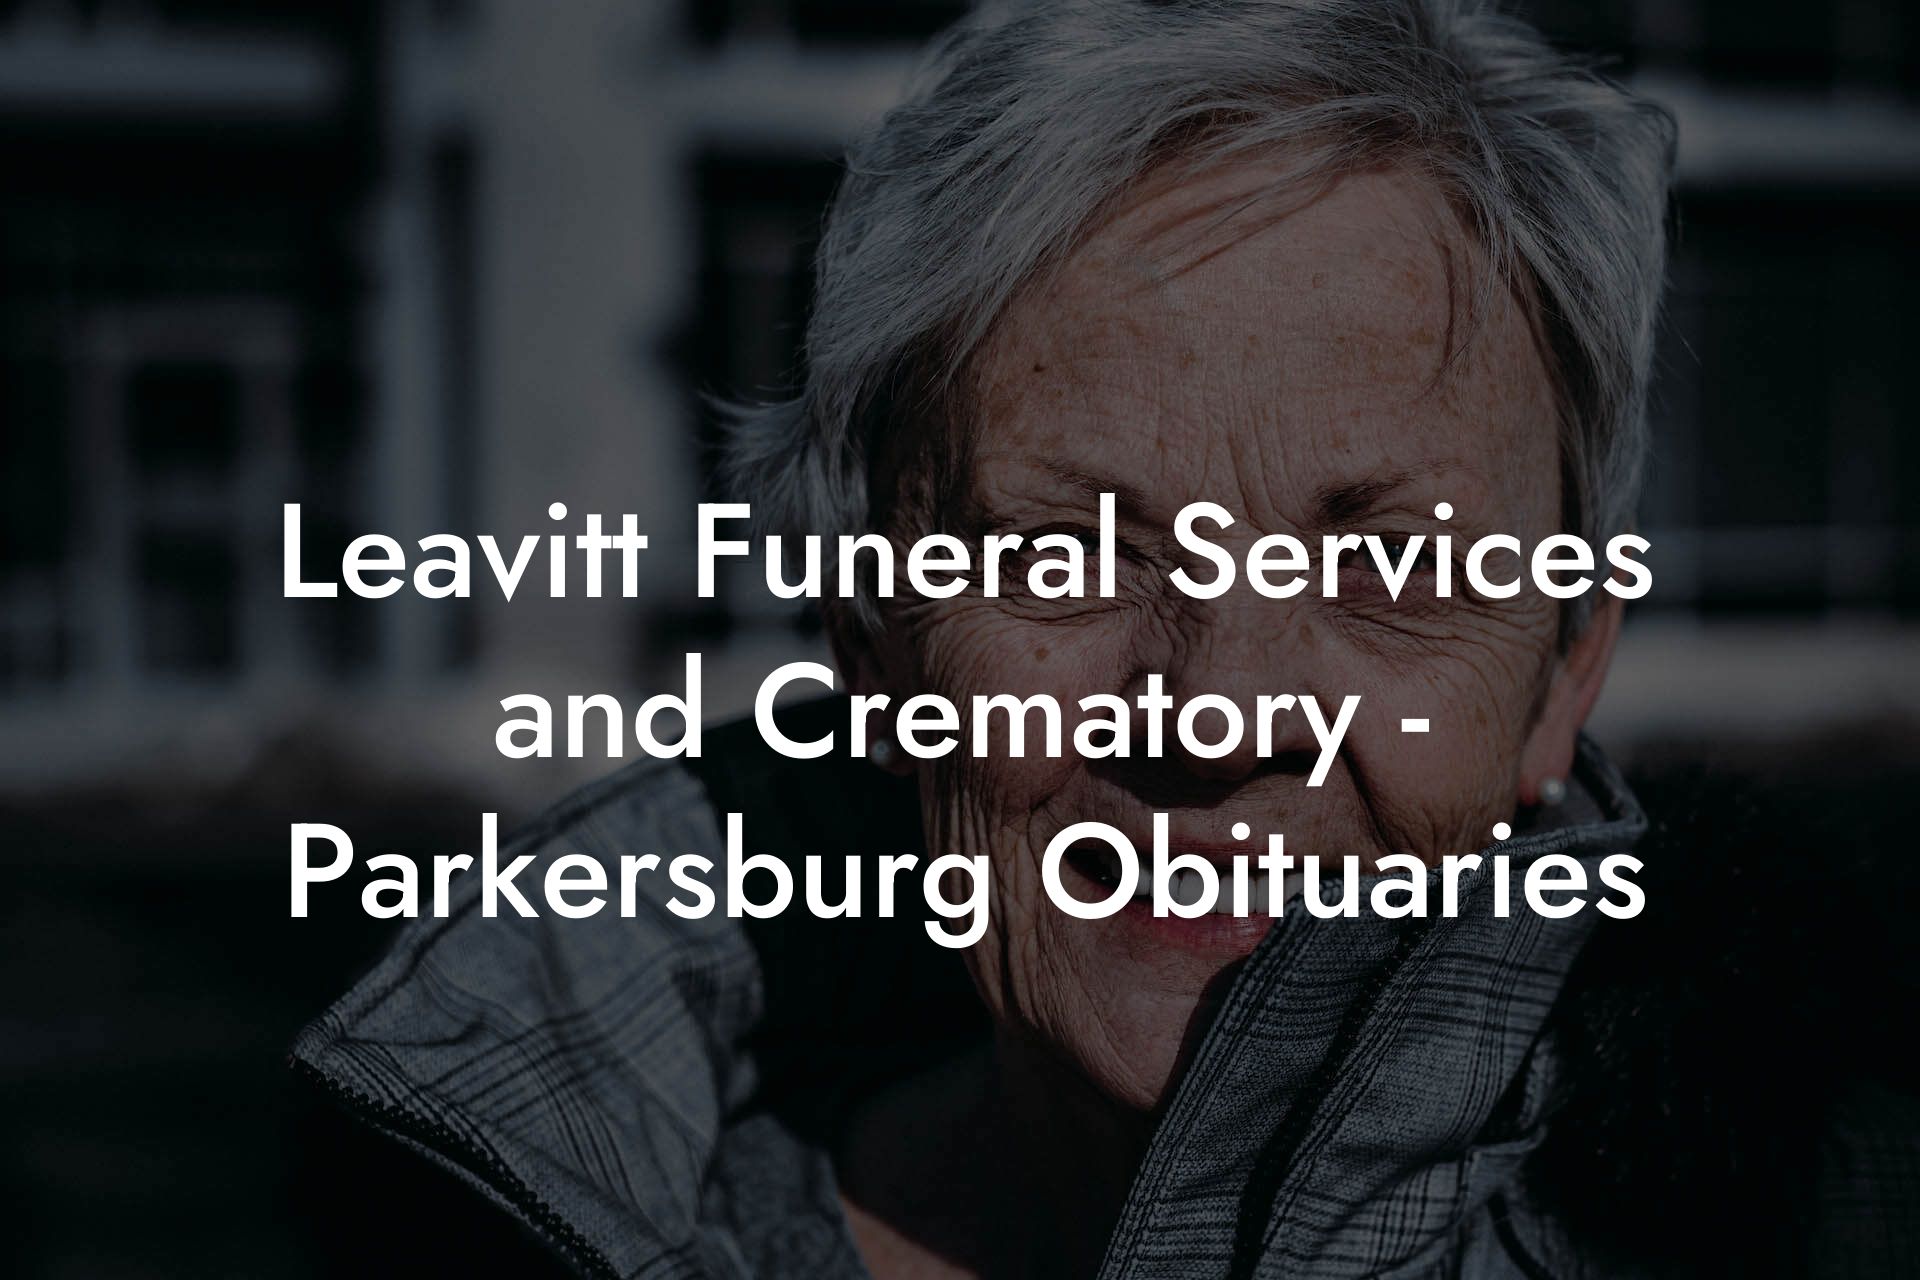 Leavitt Funeral Services and Crematory - Parkersburg Obituaries